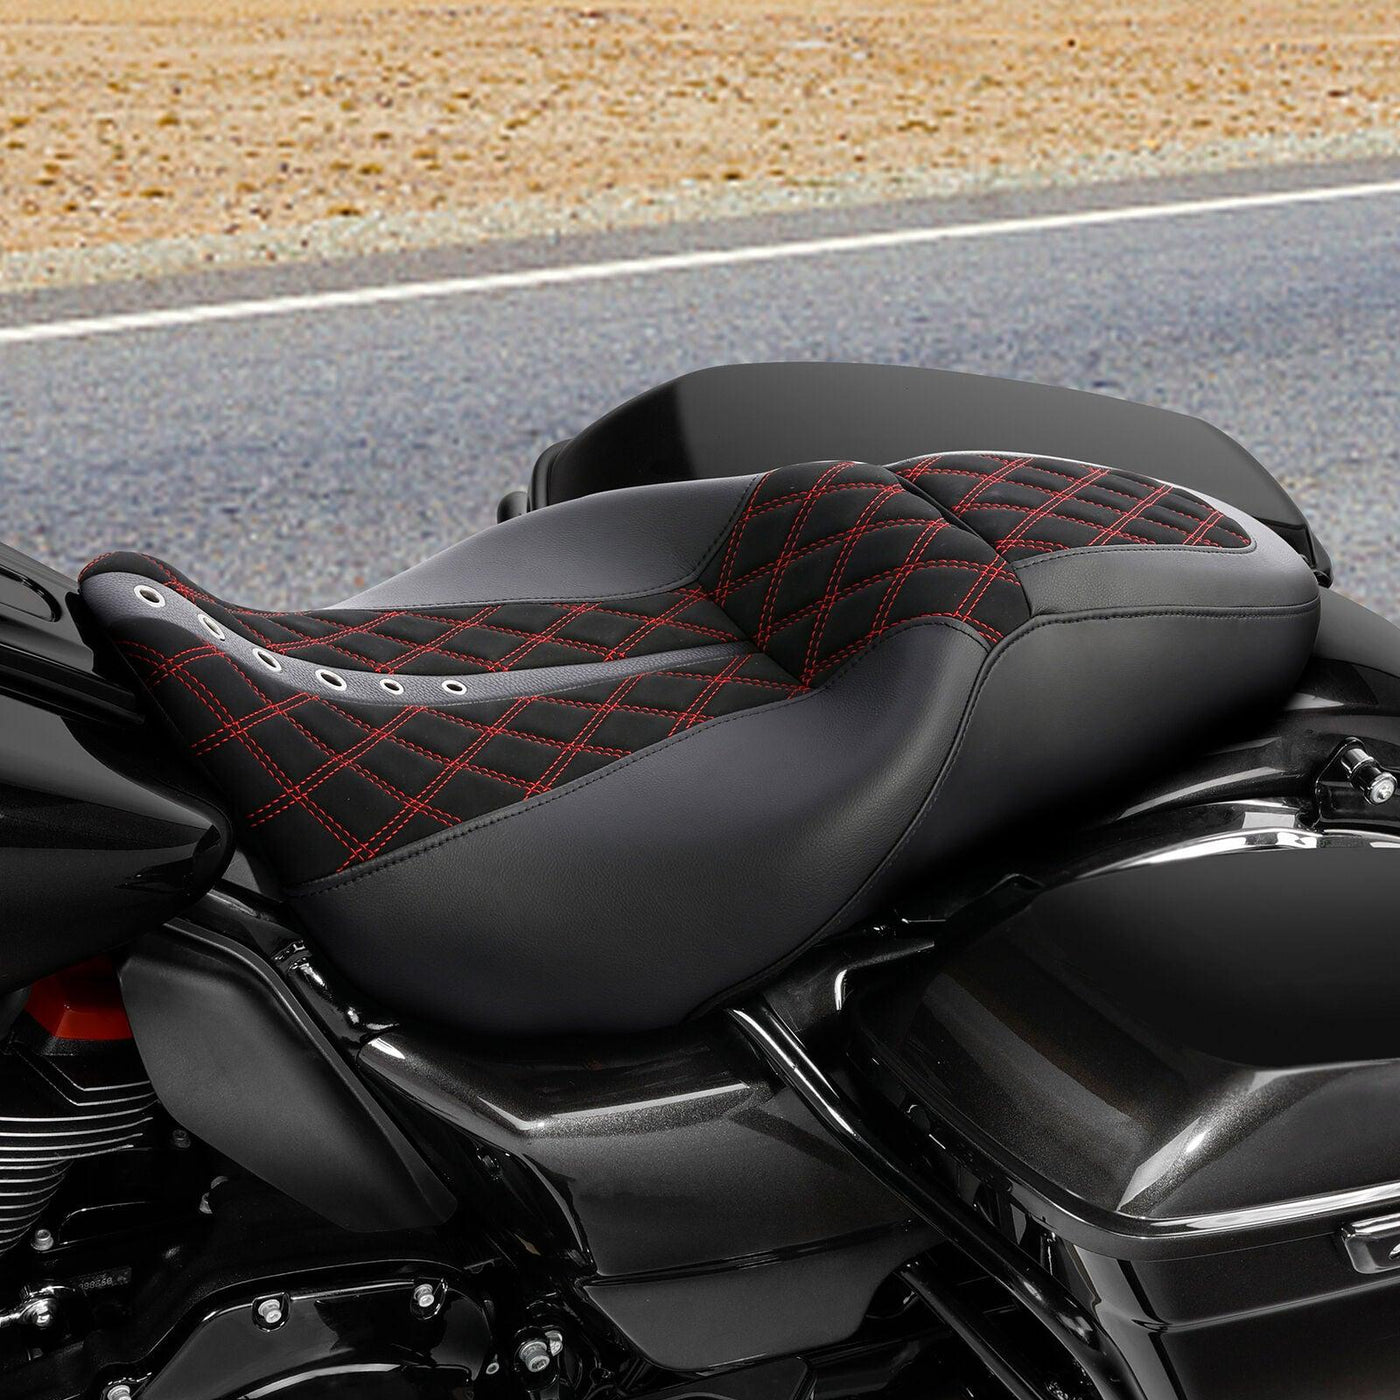 Driver Passenger Two Up Seat Fit For Harley Touring CVO Road Street Glide 09-22 - Moto Life Products